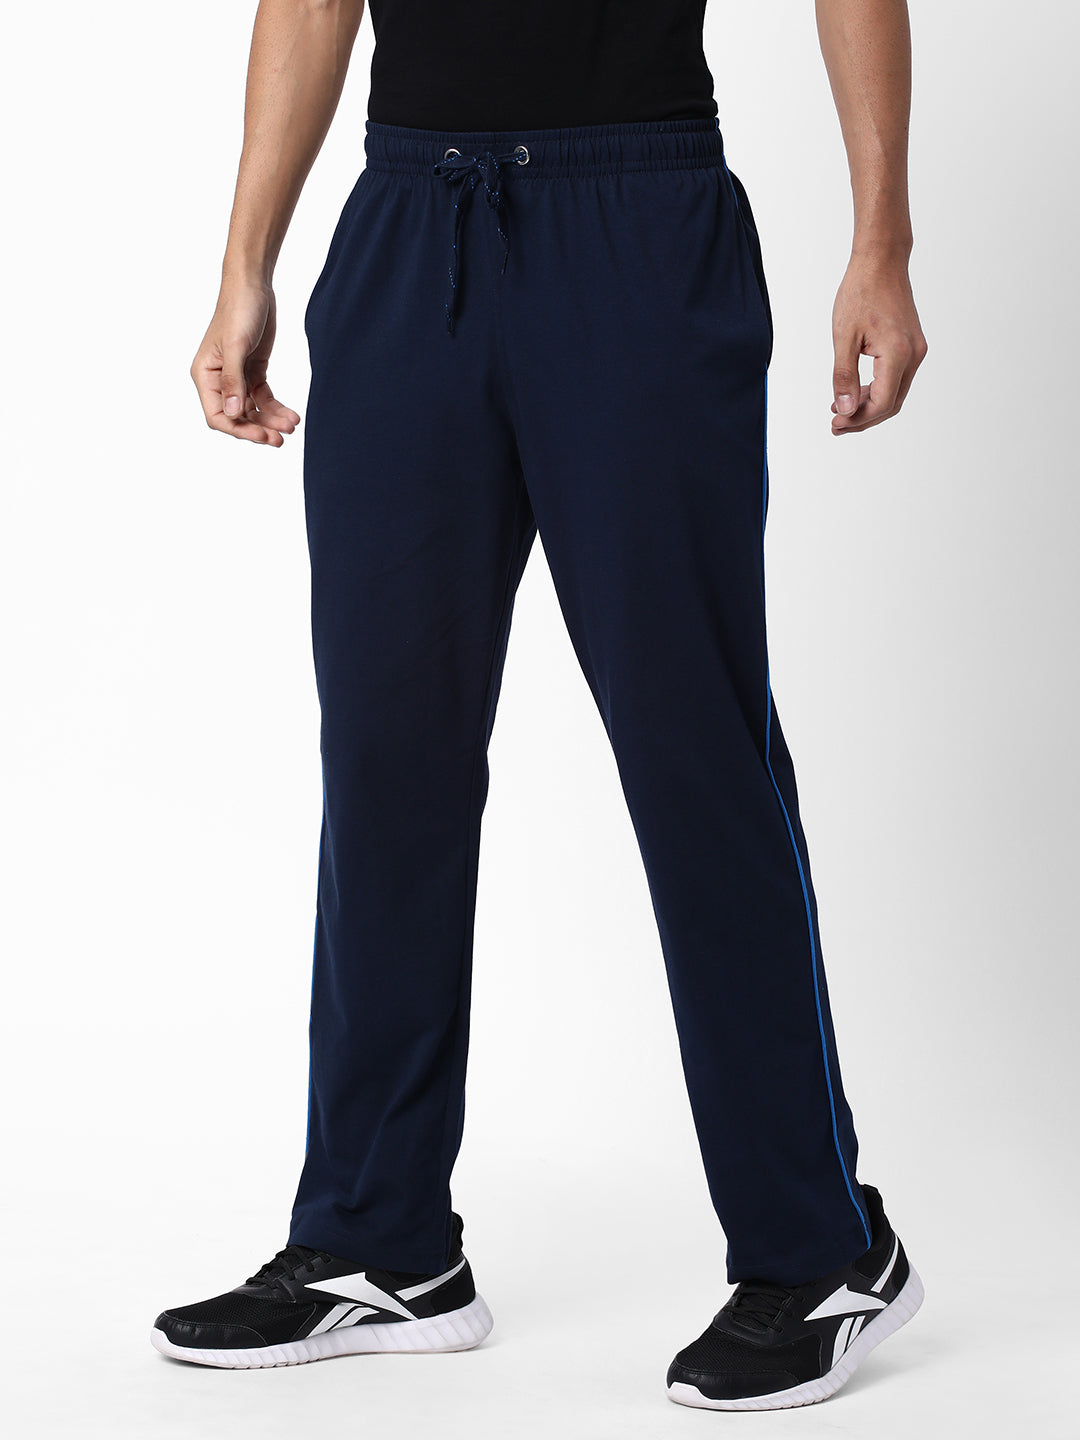 Buy Navy blue & White Track Pants for Men by Incite Online | Ajio.com